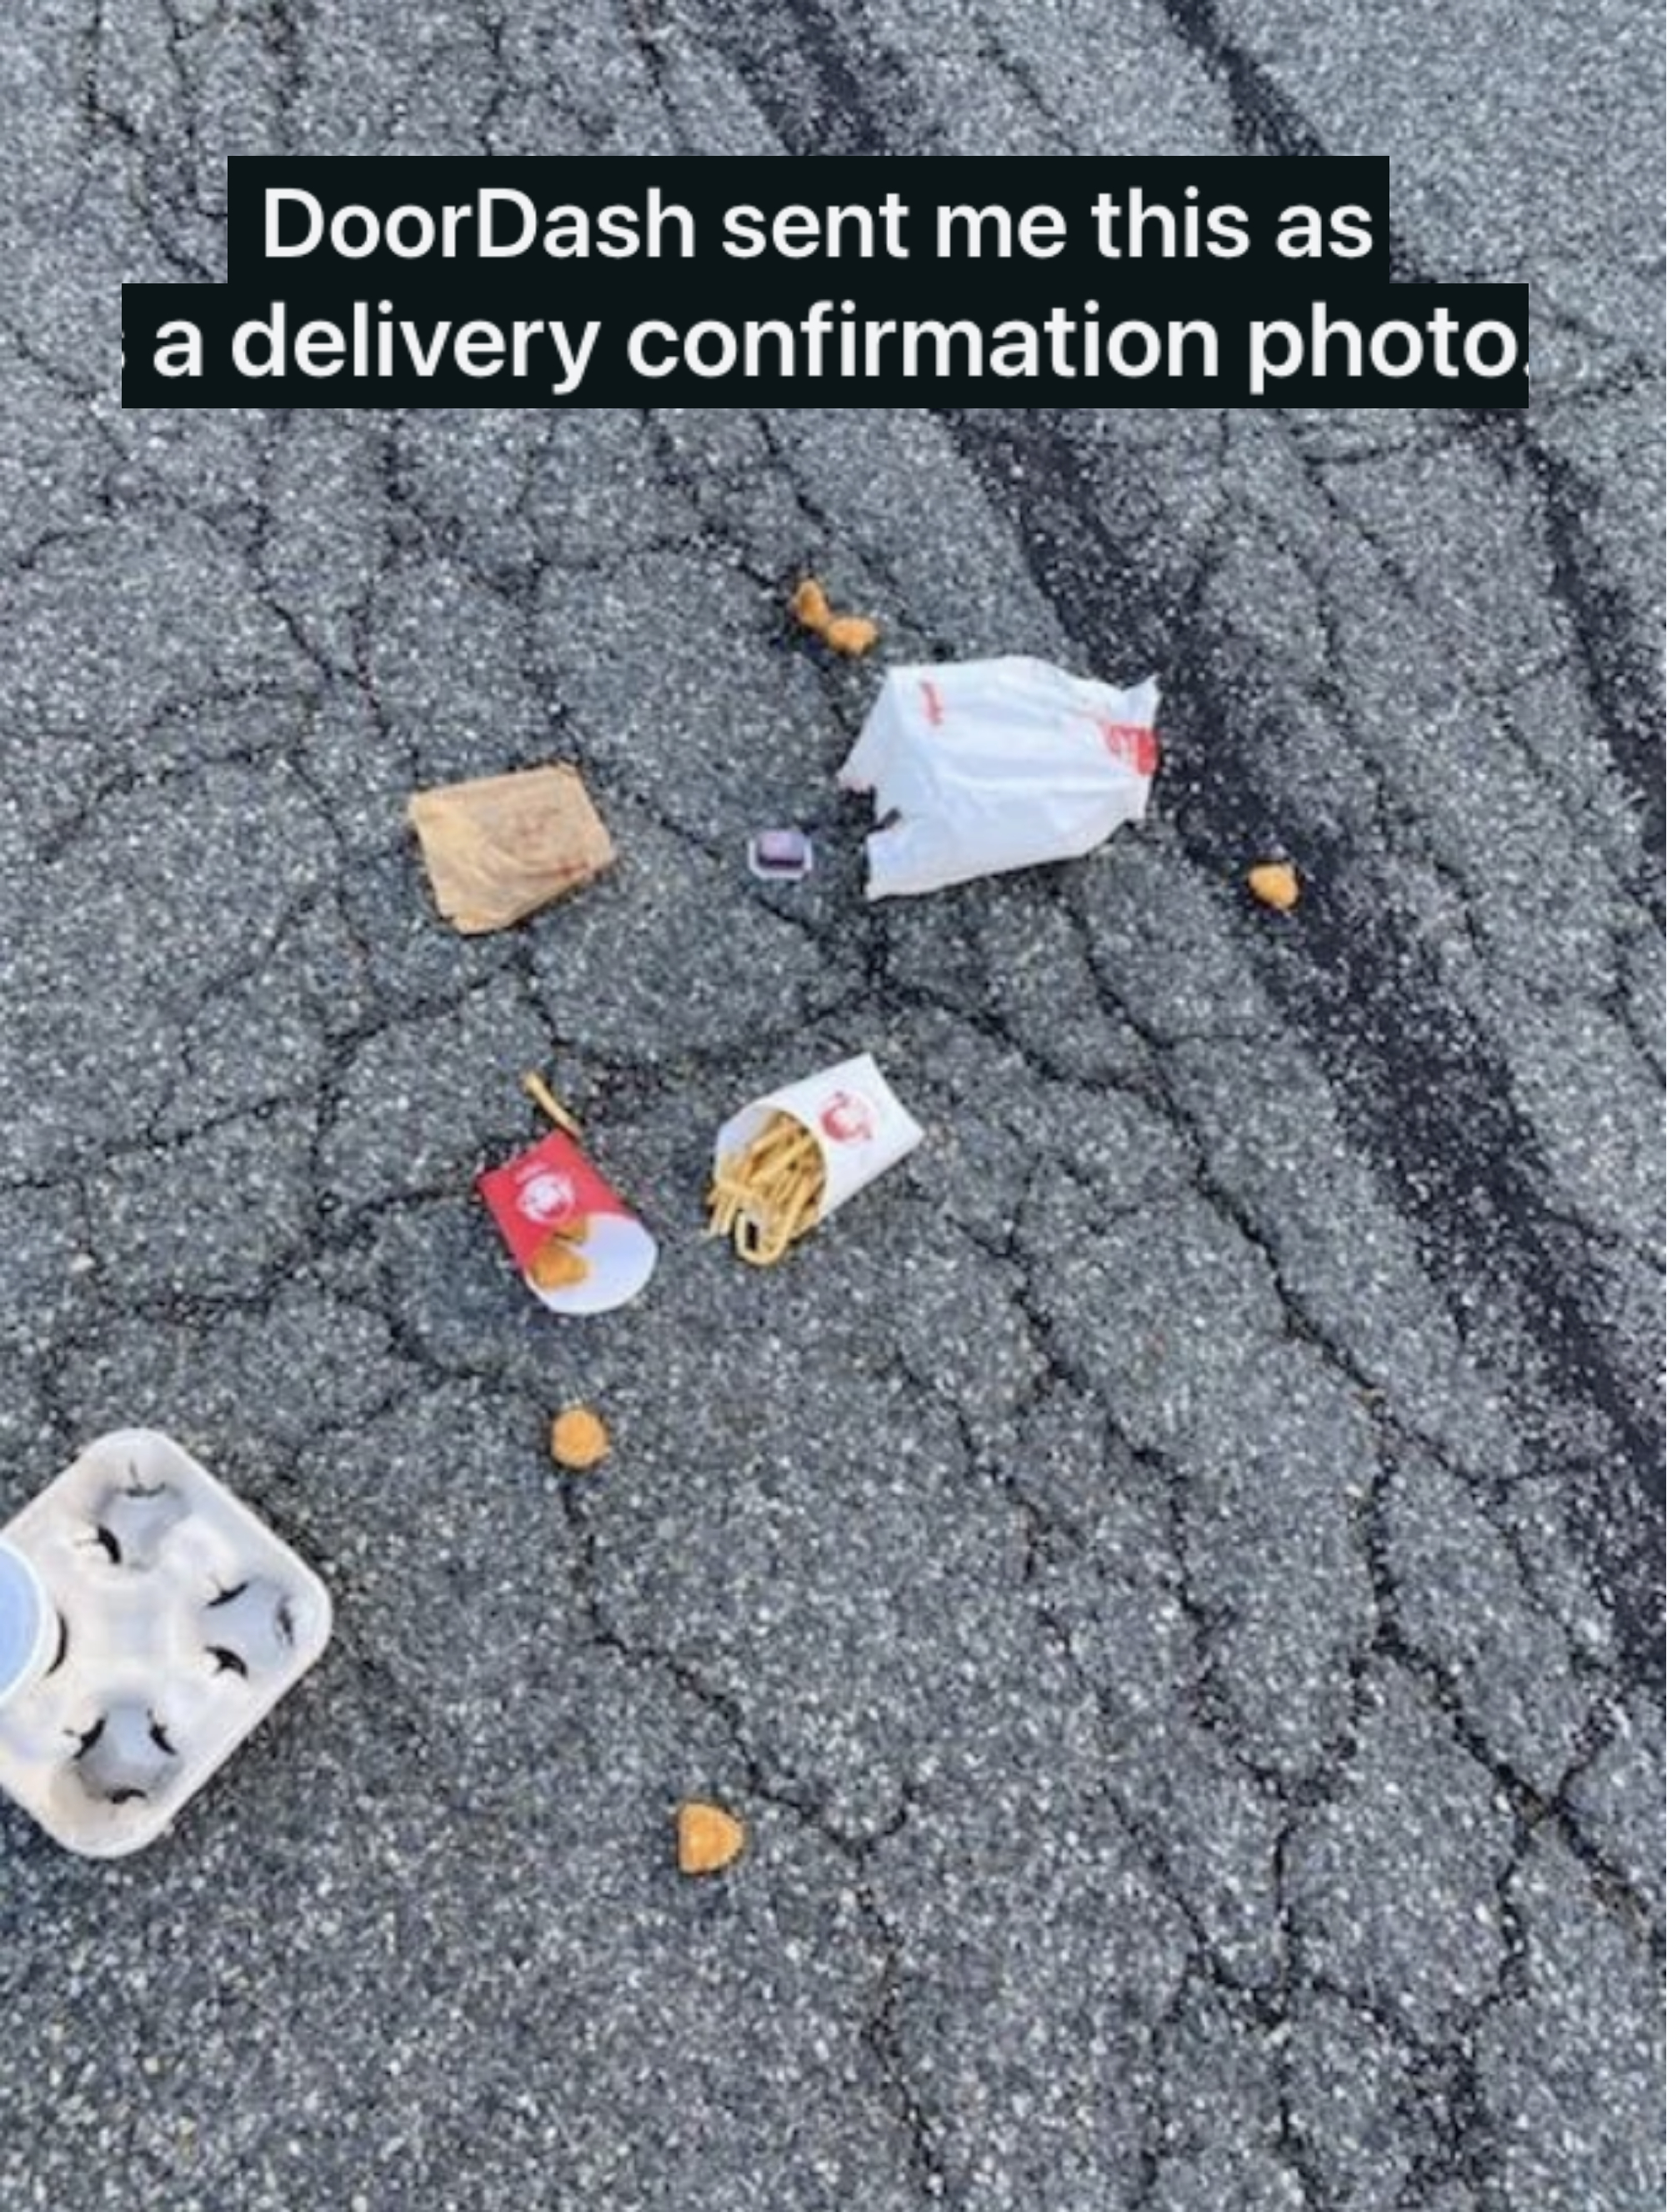 Spilled fast food on the gravel